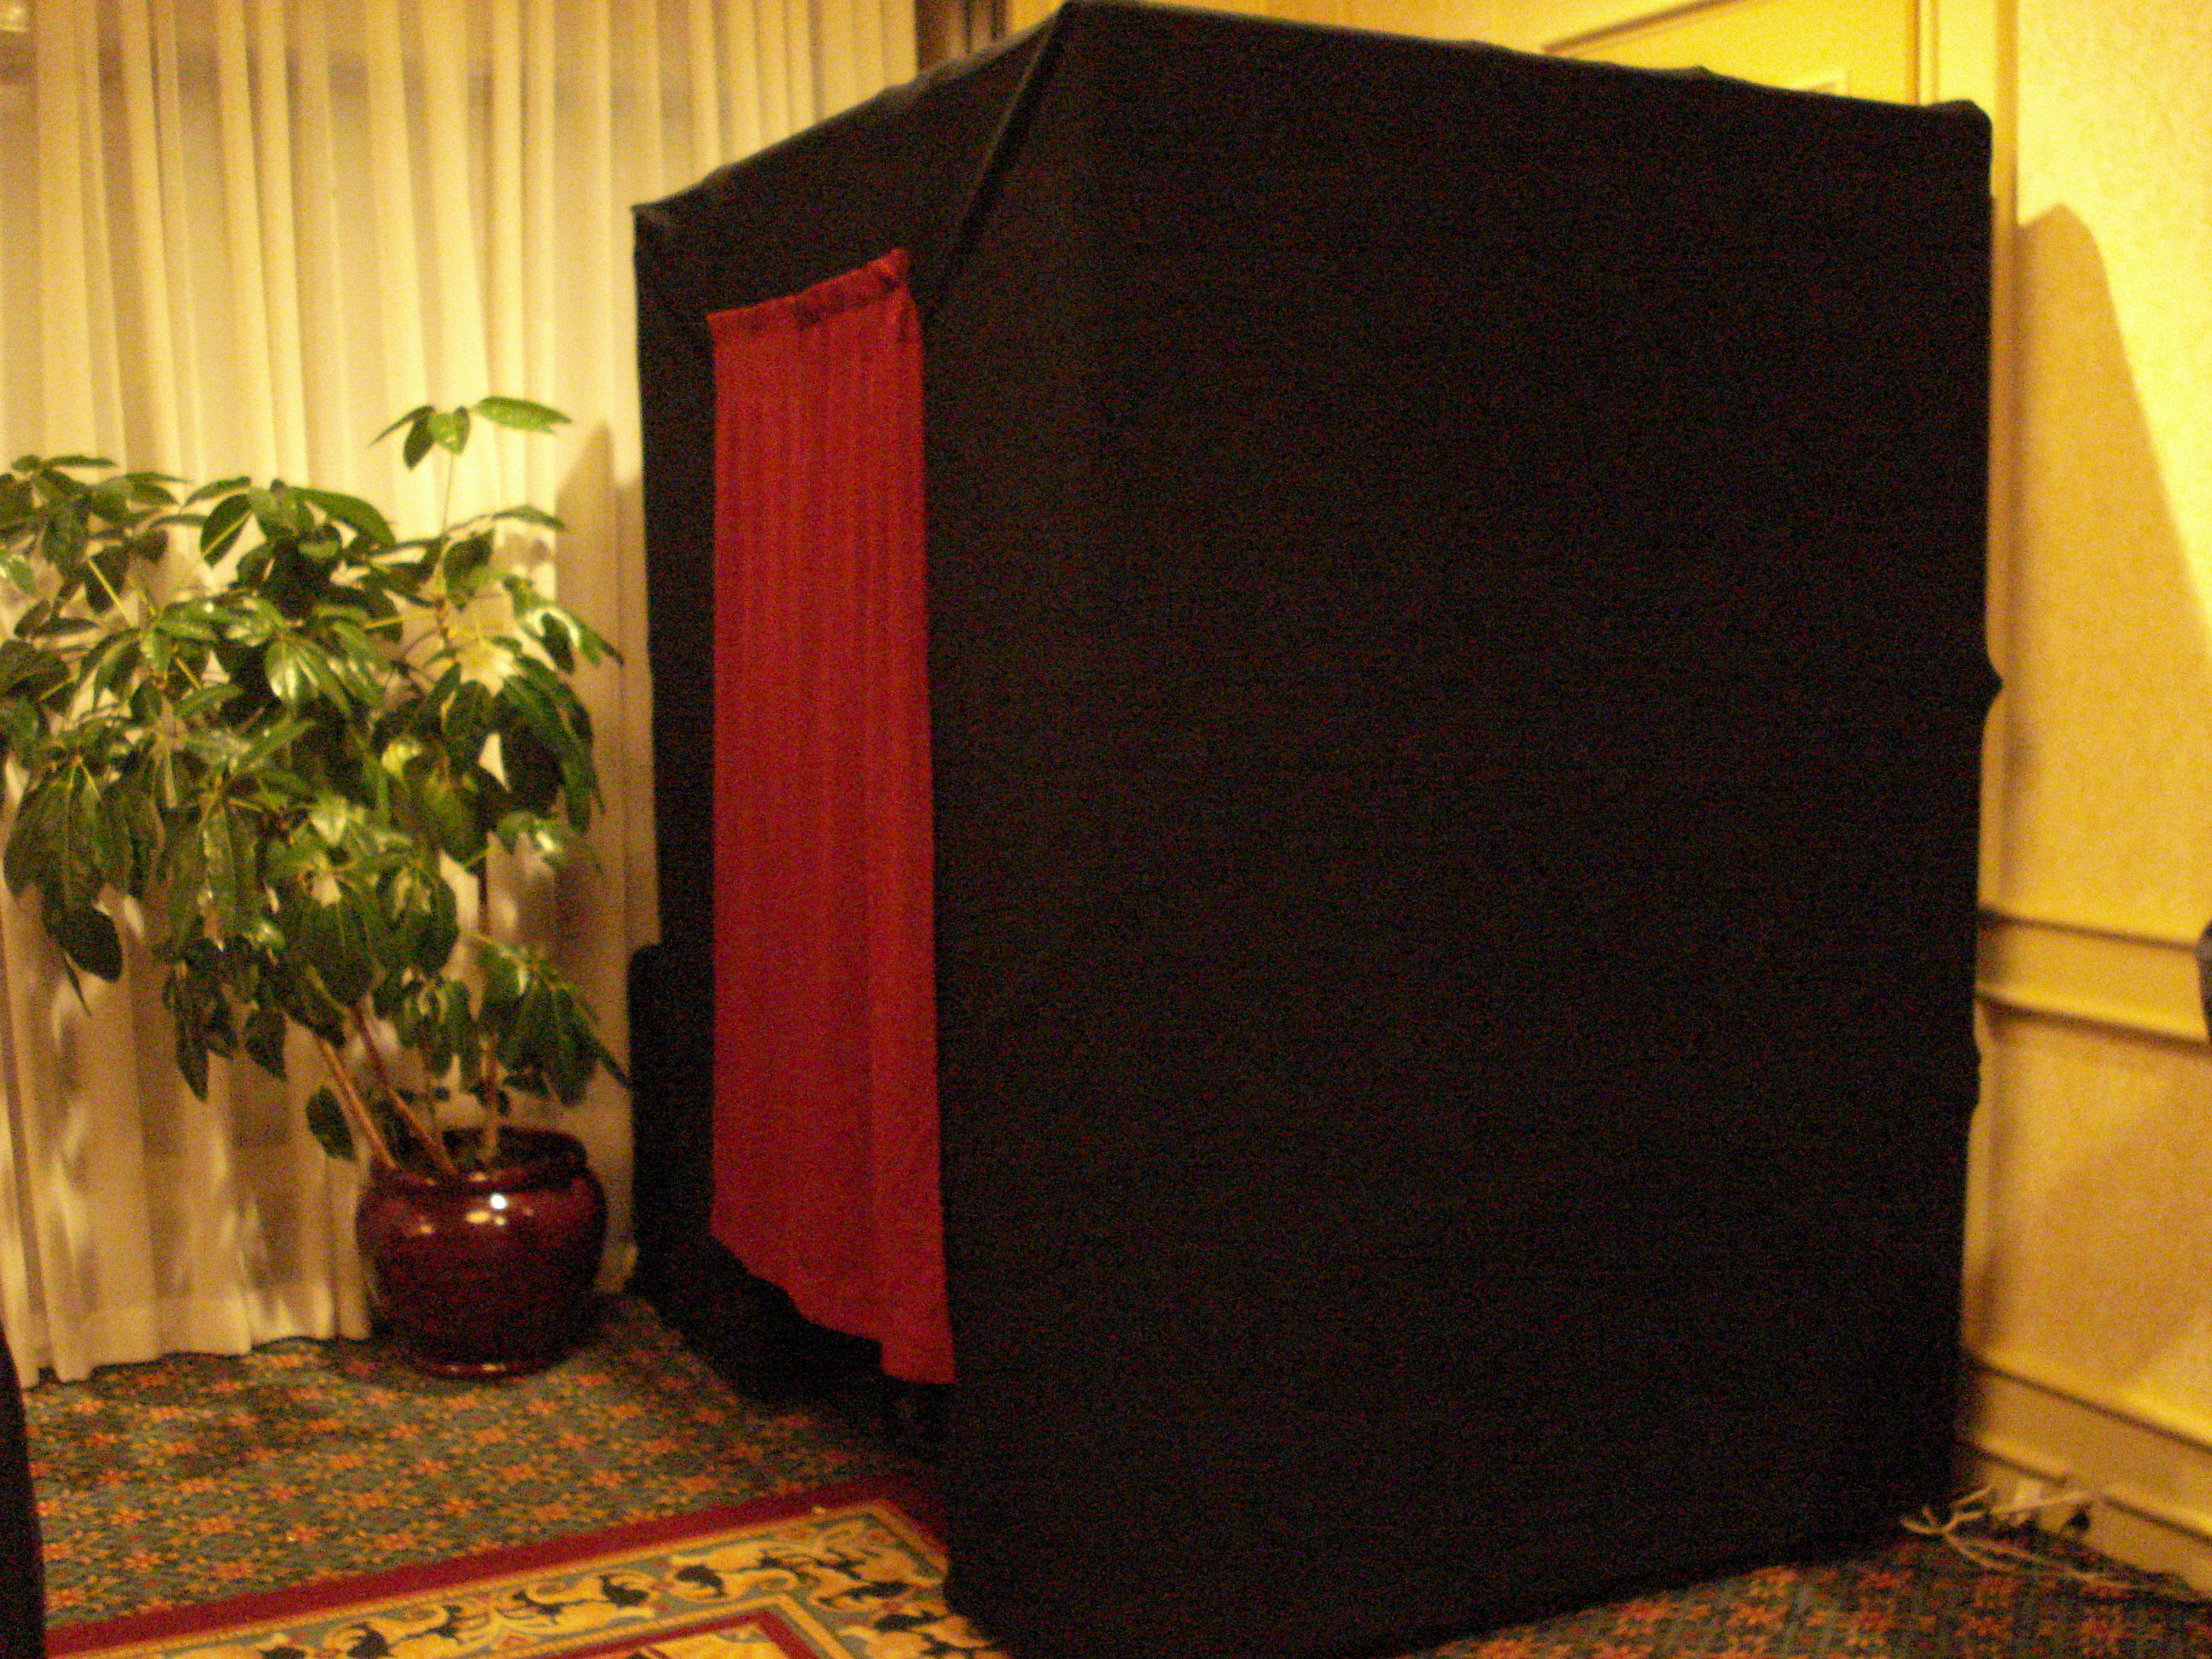 Photo Booth by PartyBooths